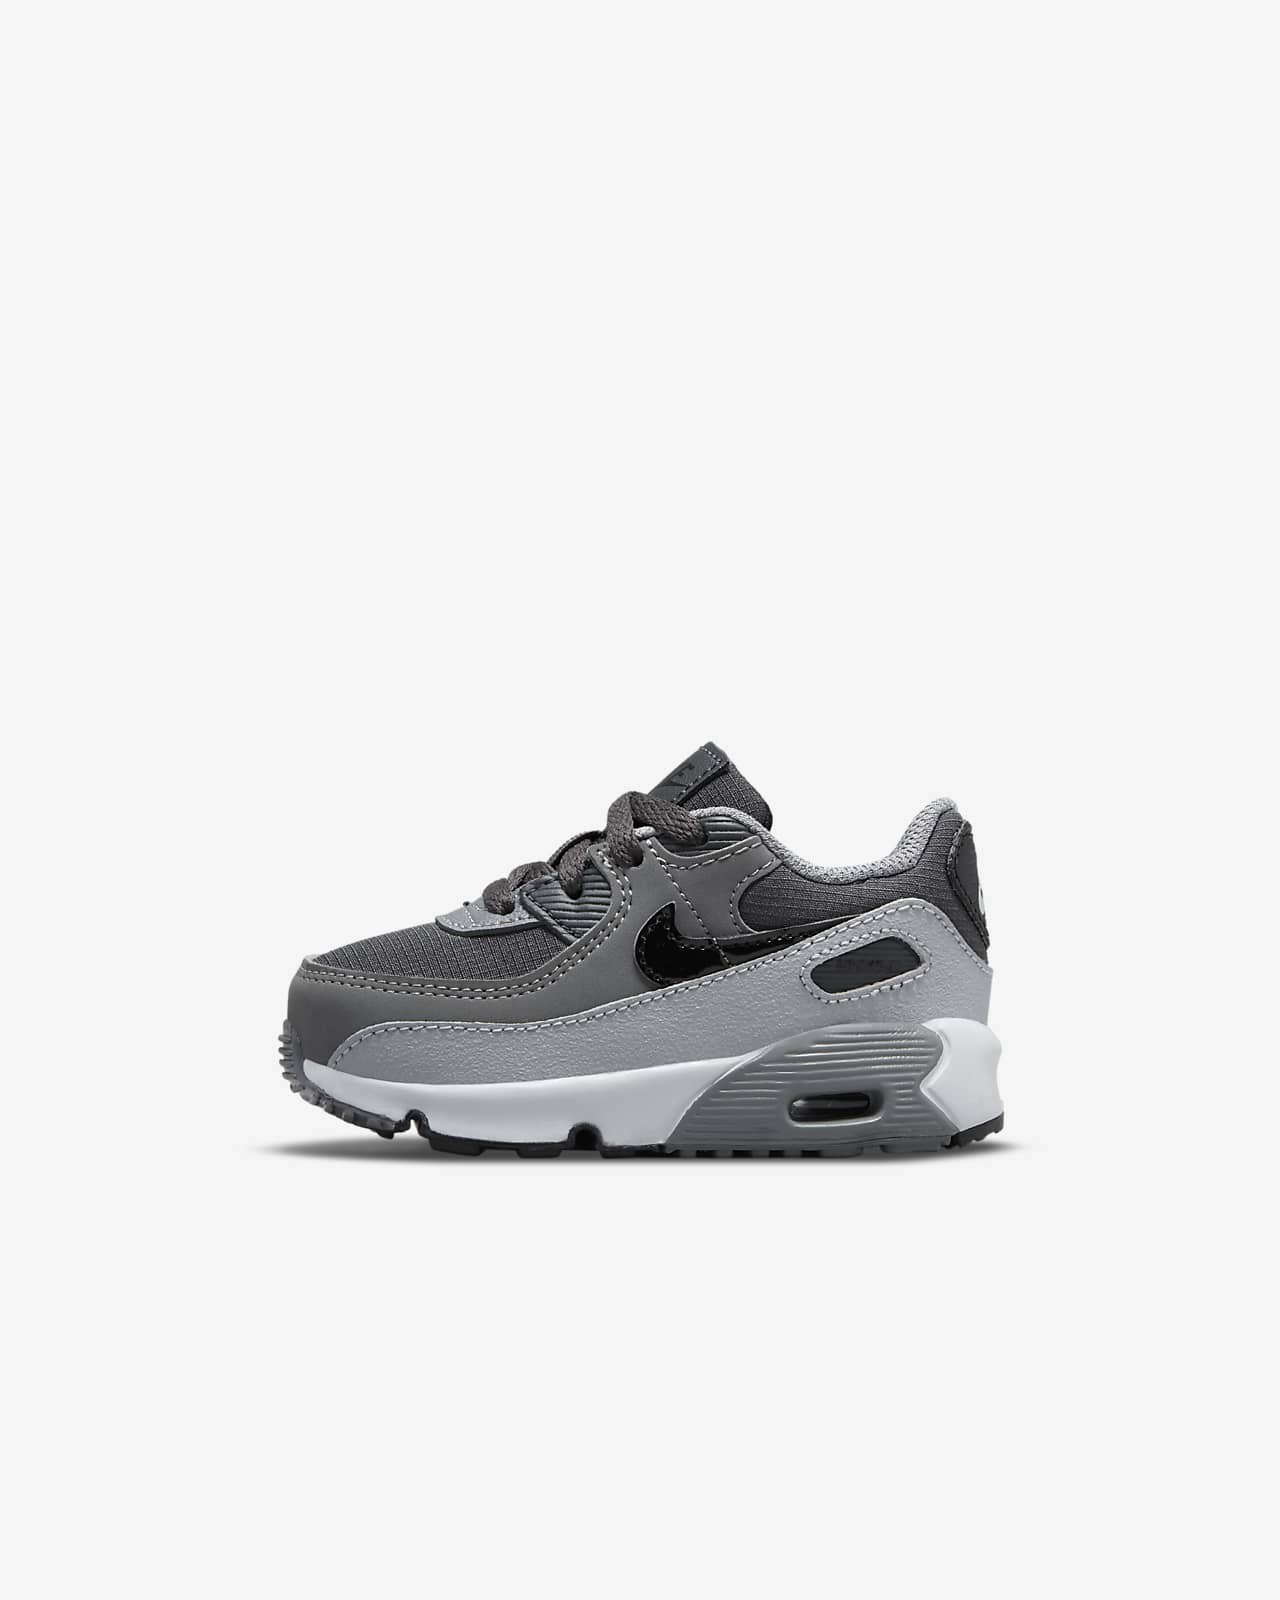 Nike Air Max 90 LTR Baby/Toddler Shoes. Nike GB